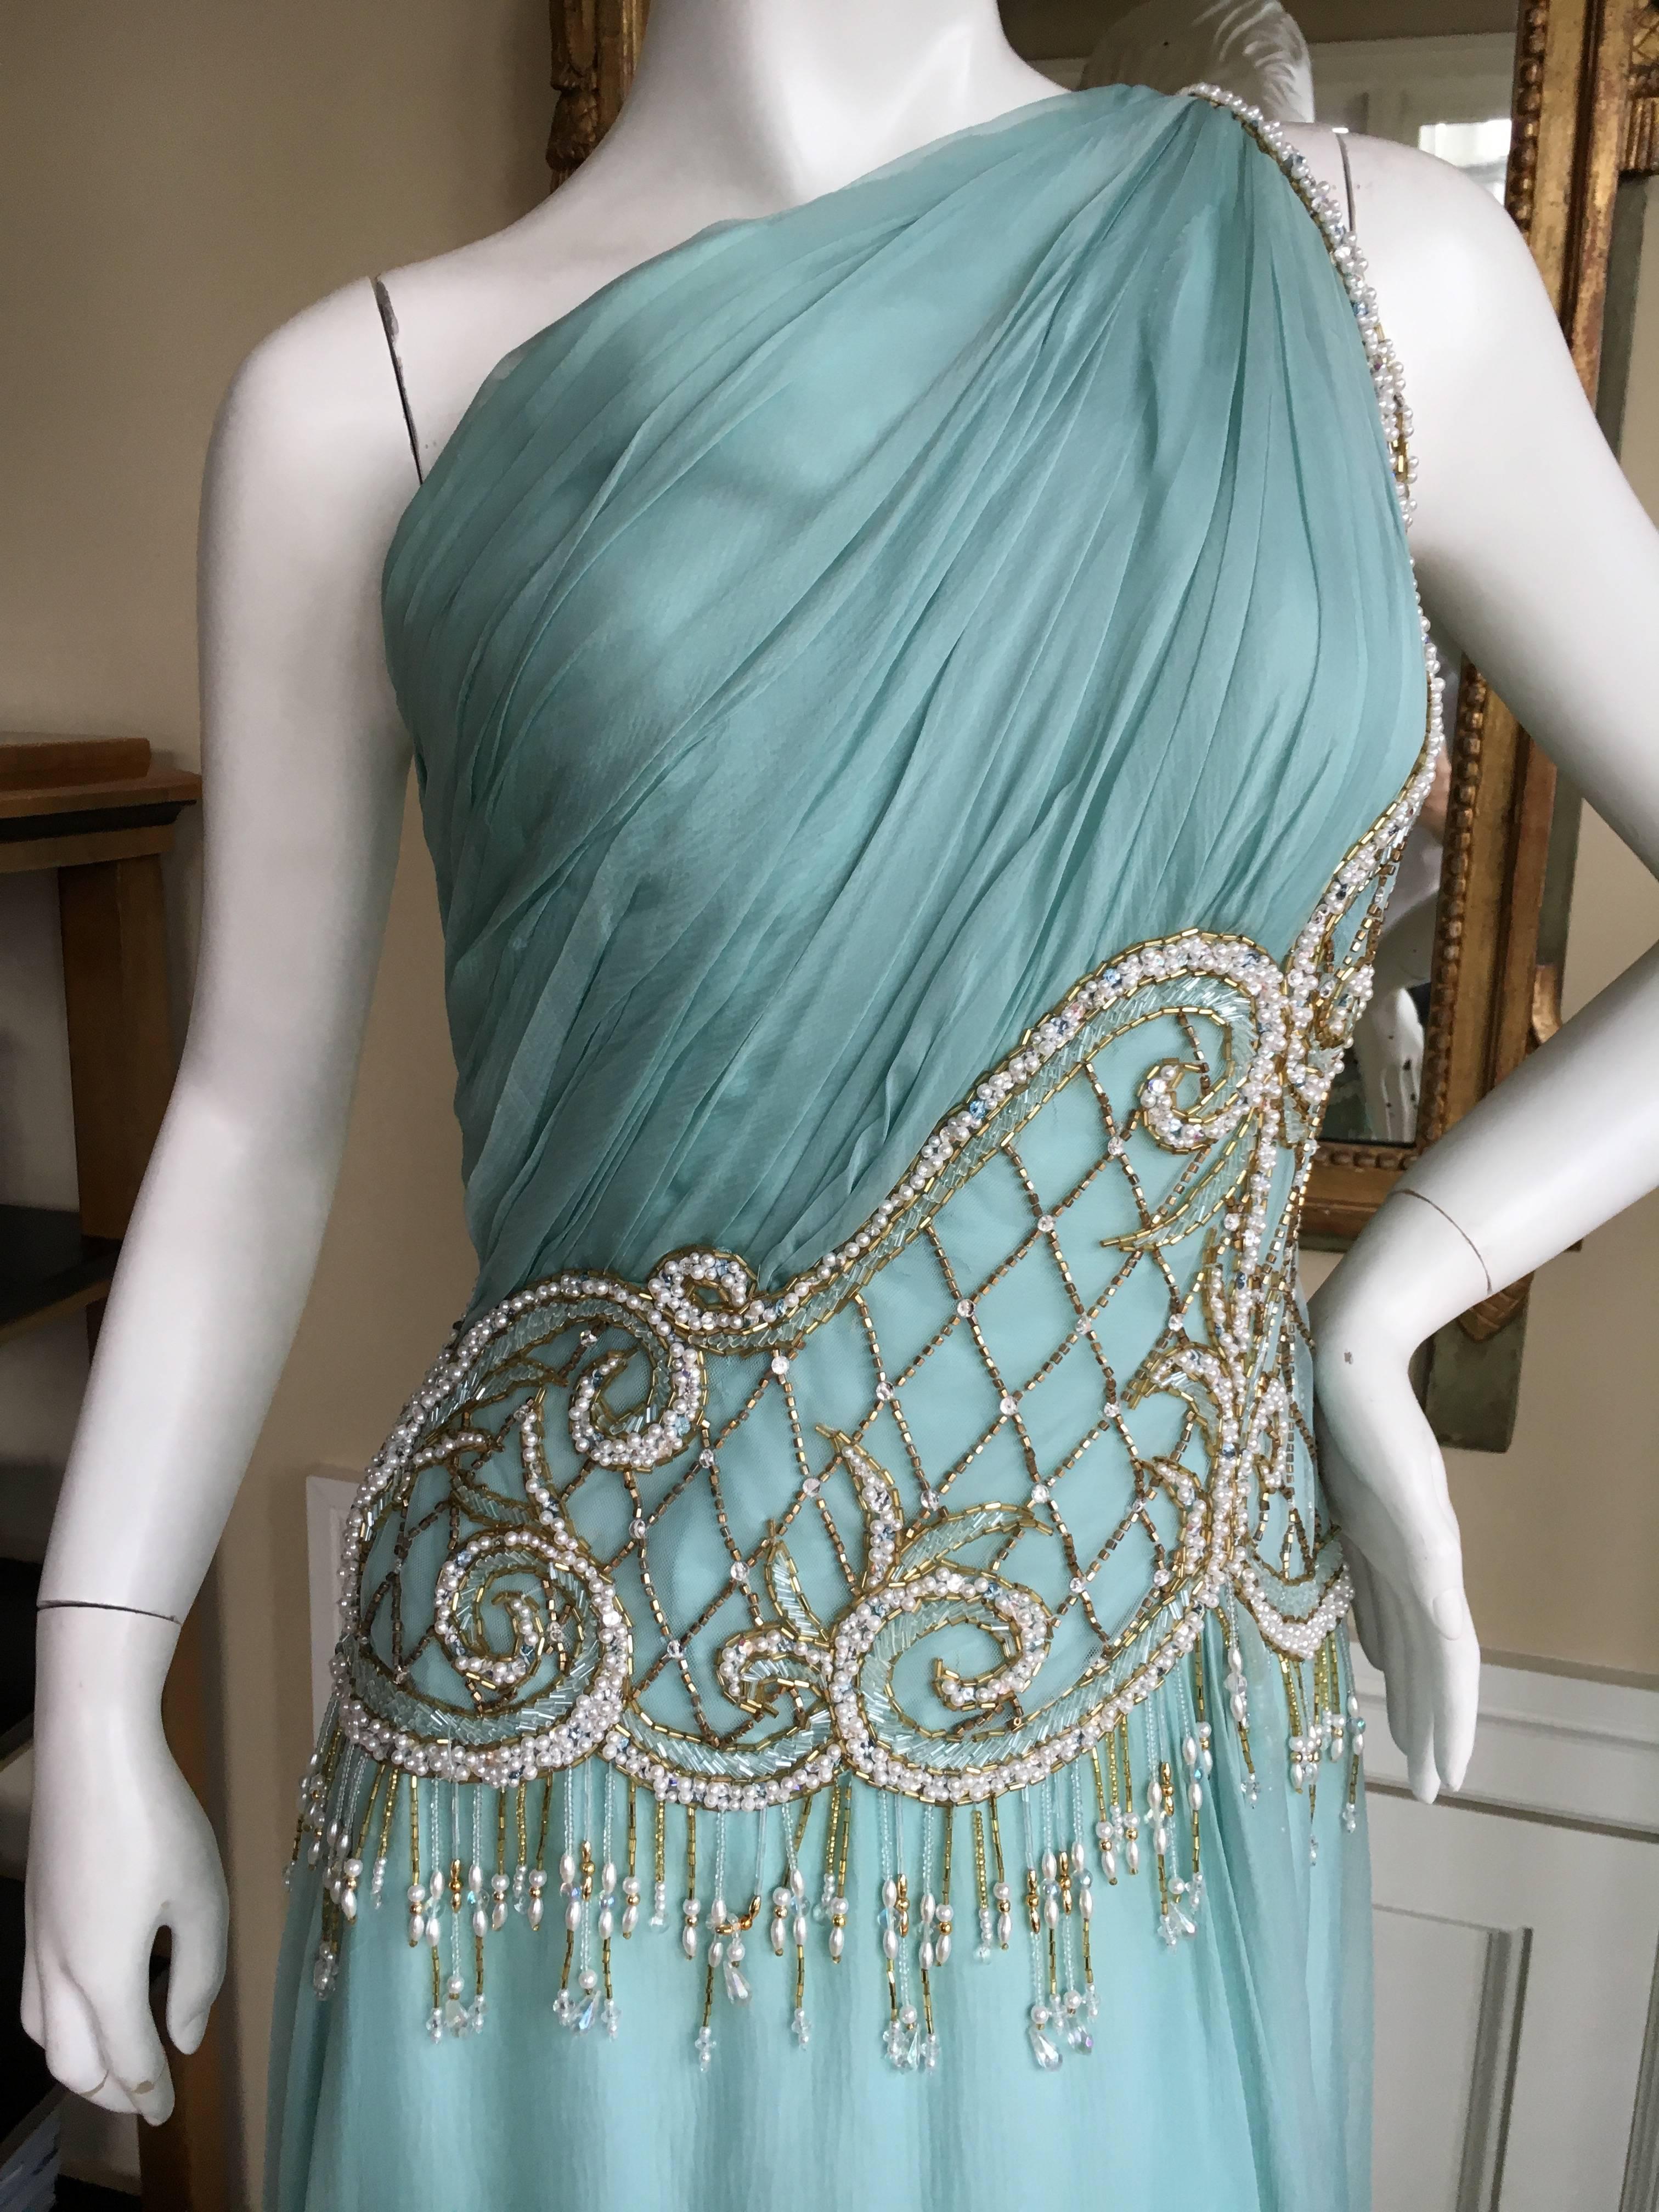 Blue Bob Mackie One Shoulder Turquoise Goddess Gown with Fringe Pearl Embellishment